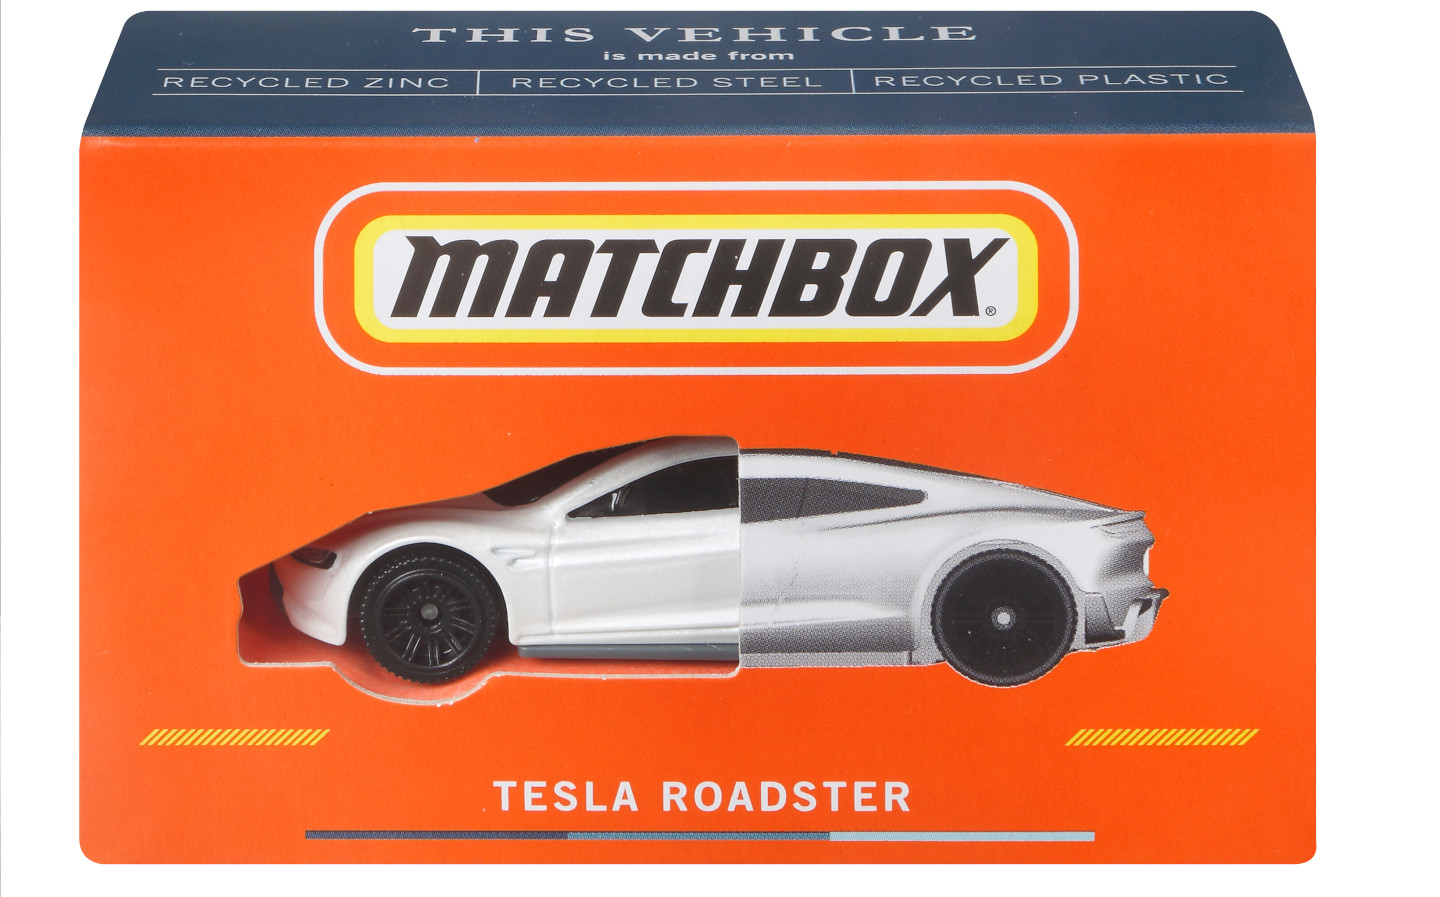 Matchbox relaunches in UK with model of 250mph, 0-60mph in 1.8 secs Tesla Roadster